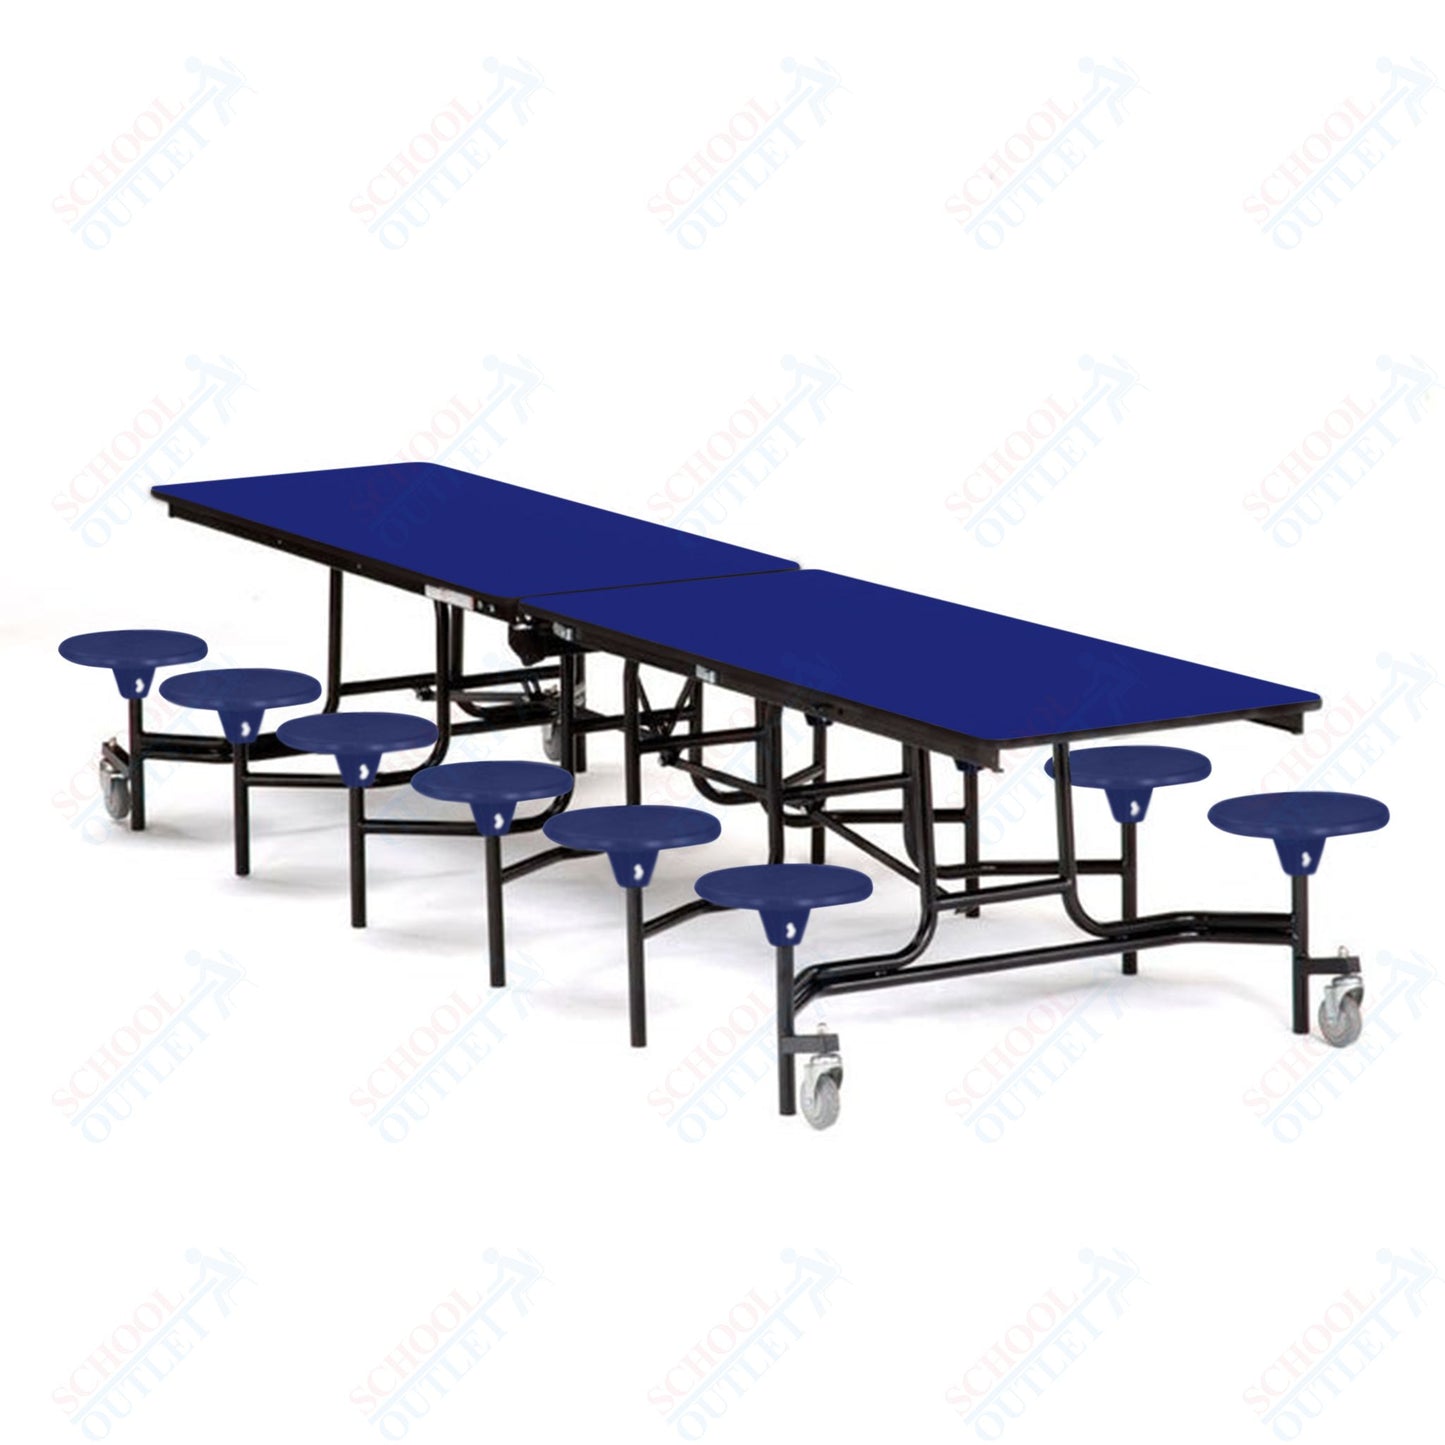 Mobile Cafeteria Lunchroom Stool Table - 30" W x 12' L - 12 Stools - Plywood Core - T-Molding Edge -  Black Powdercoated Frame